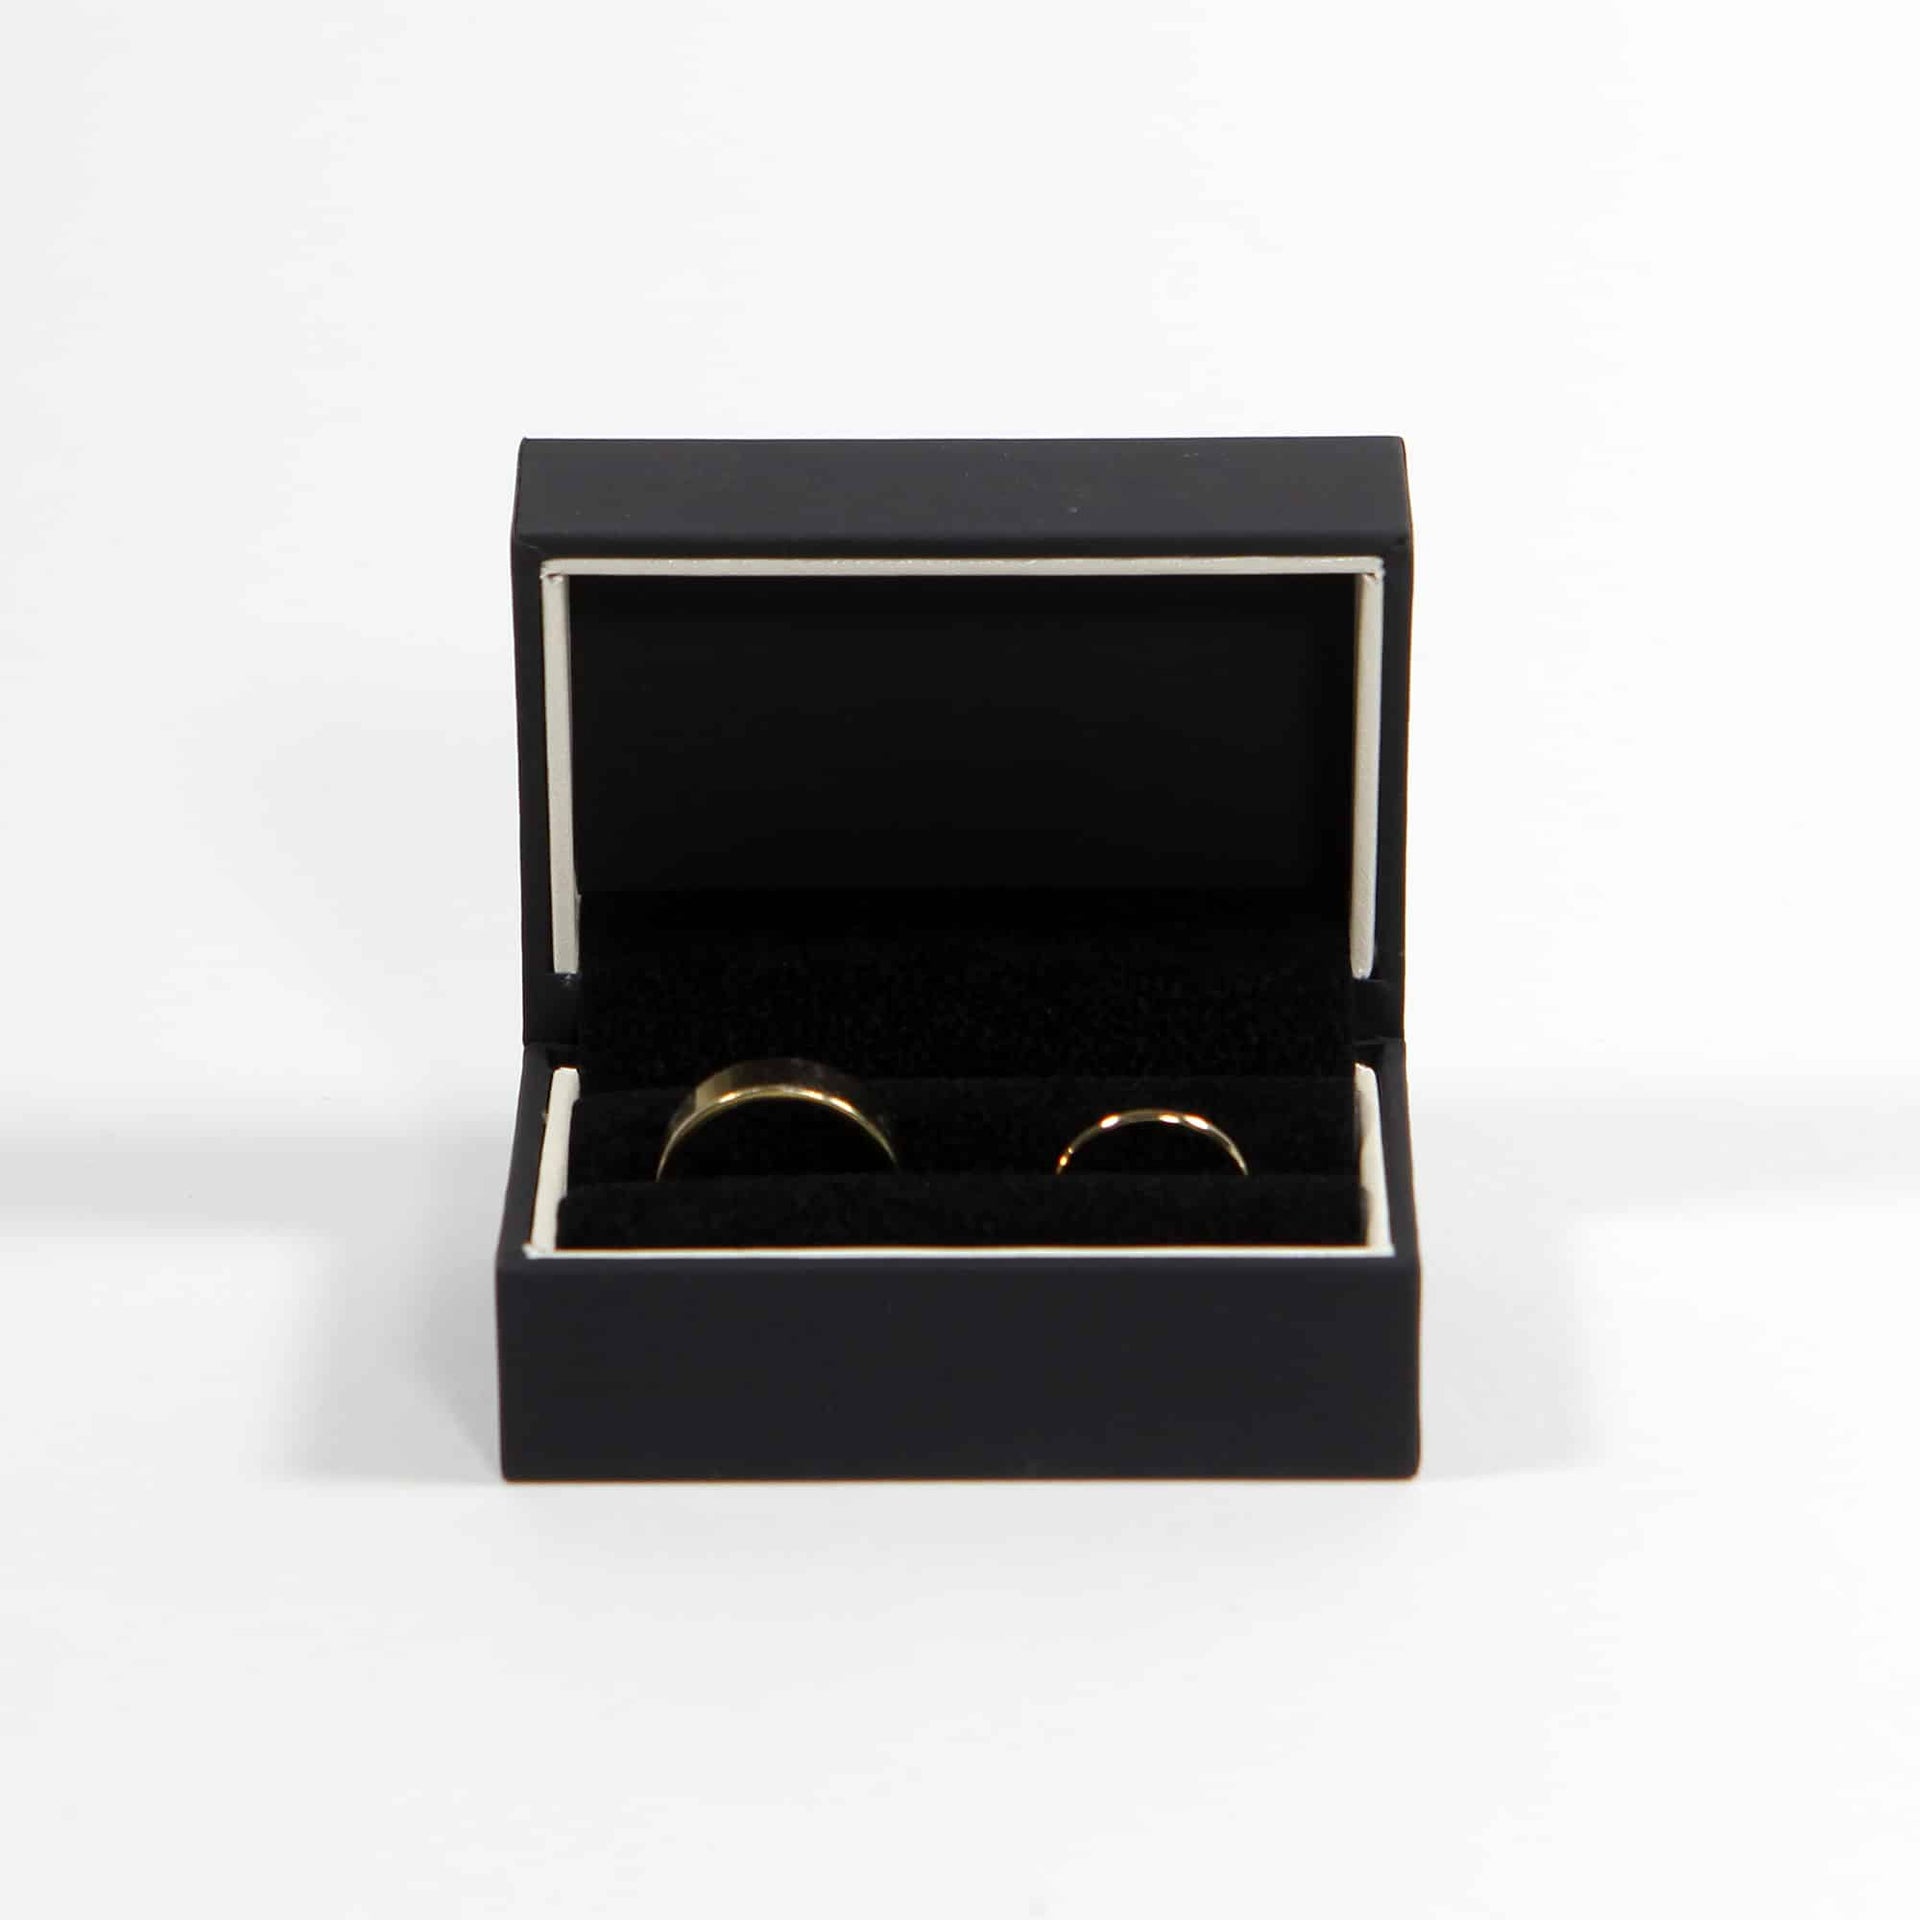 luxury wedding bands ring box, perfect for wedding ceremonies and anniversaries